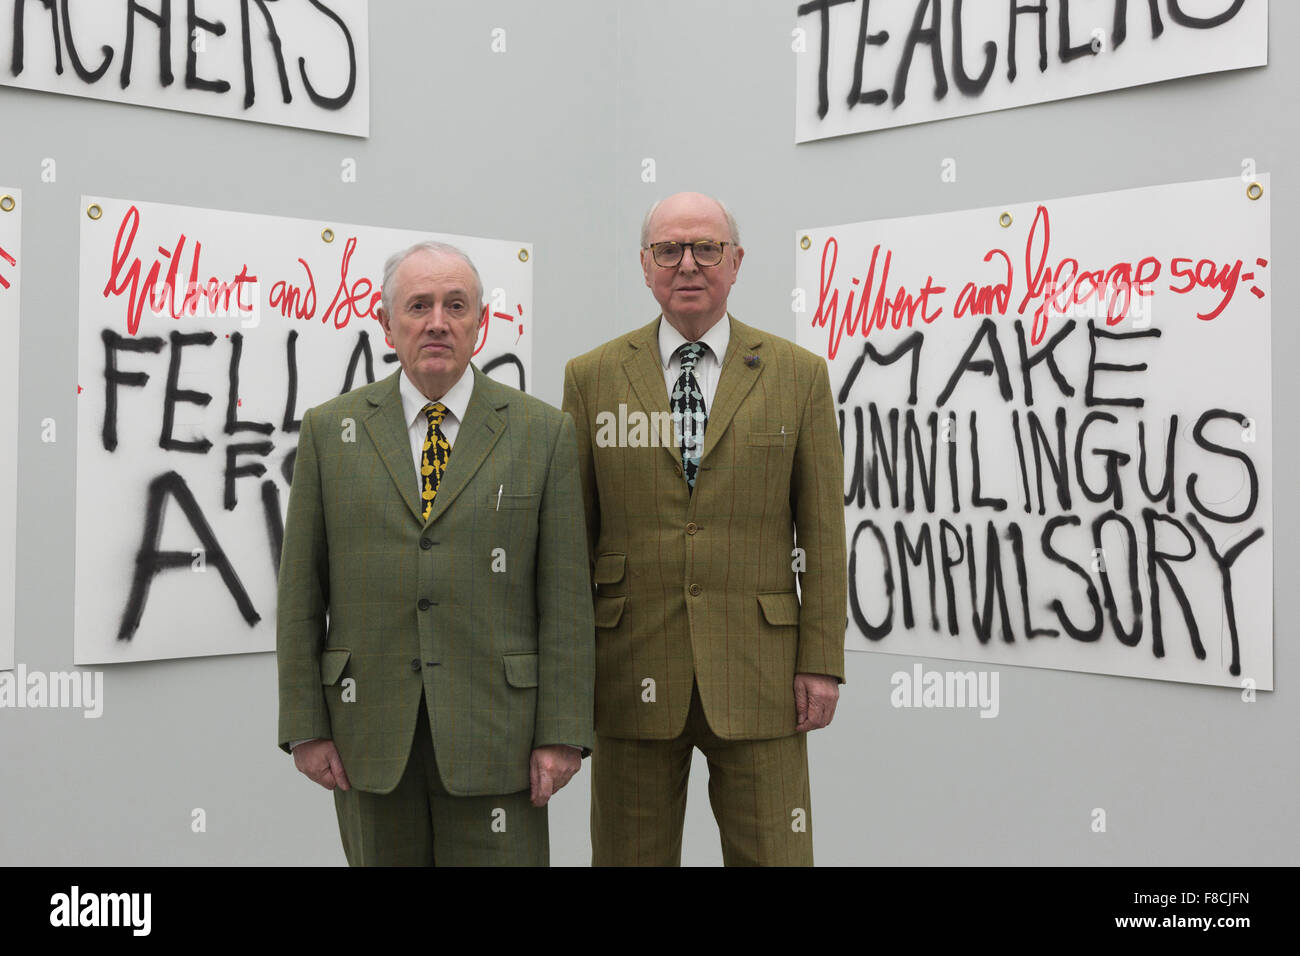 London, UK. 8 December 2015. Pictured: L-R: Gilbert & George in front of their artworks The Banners. Artists Gilbert & George launch their latest publication The Banners, as well as 10 poster designs, made to coincide with their exhibition at White Cube Bermondsey. The exhibition The Banners runs from 25 November 2015 to 24 January 2016. Stock Photo